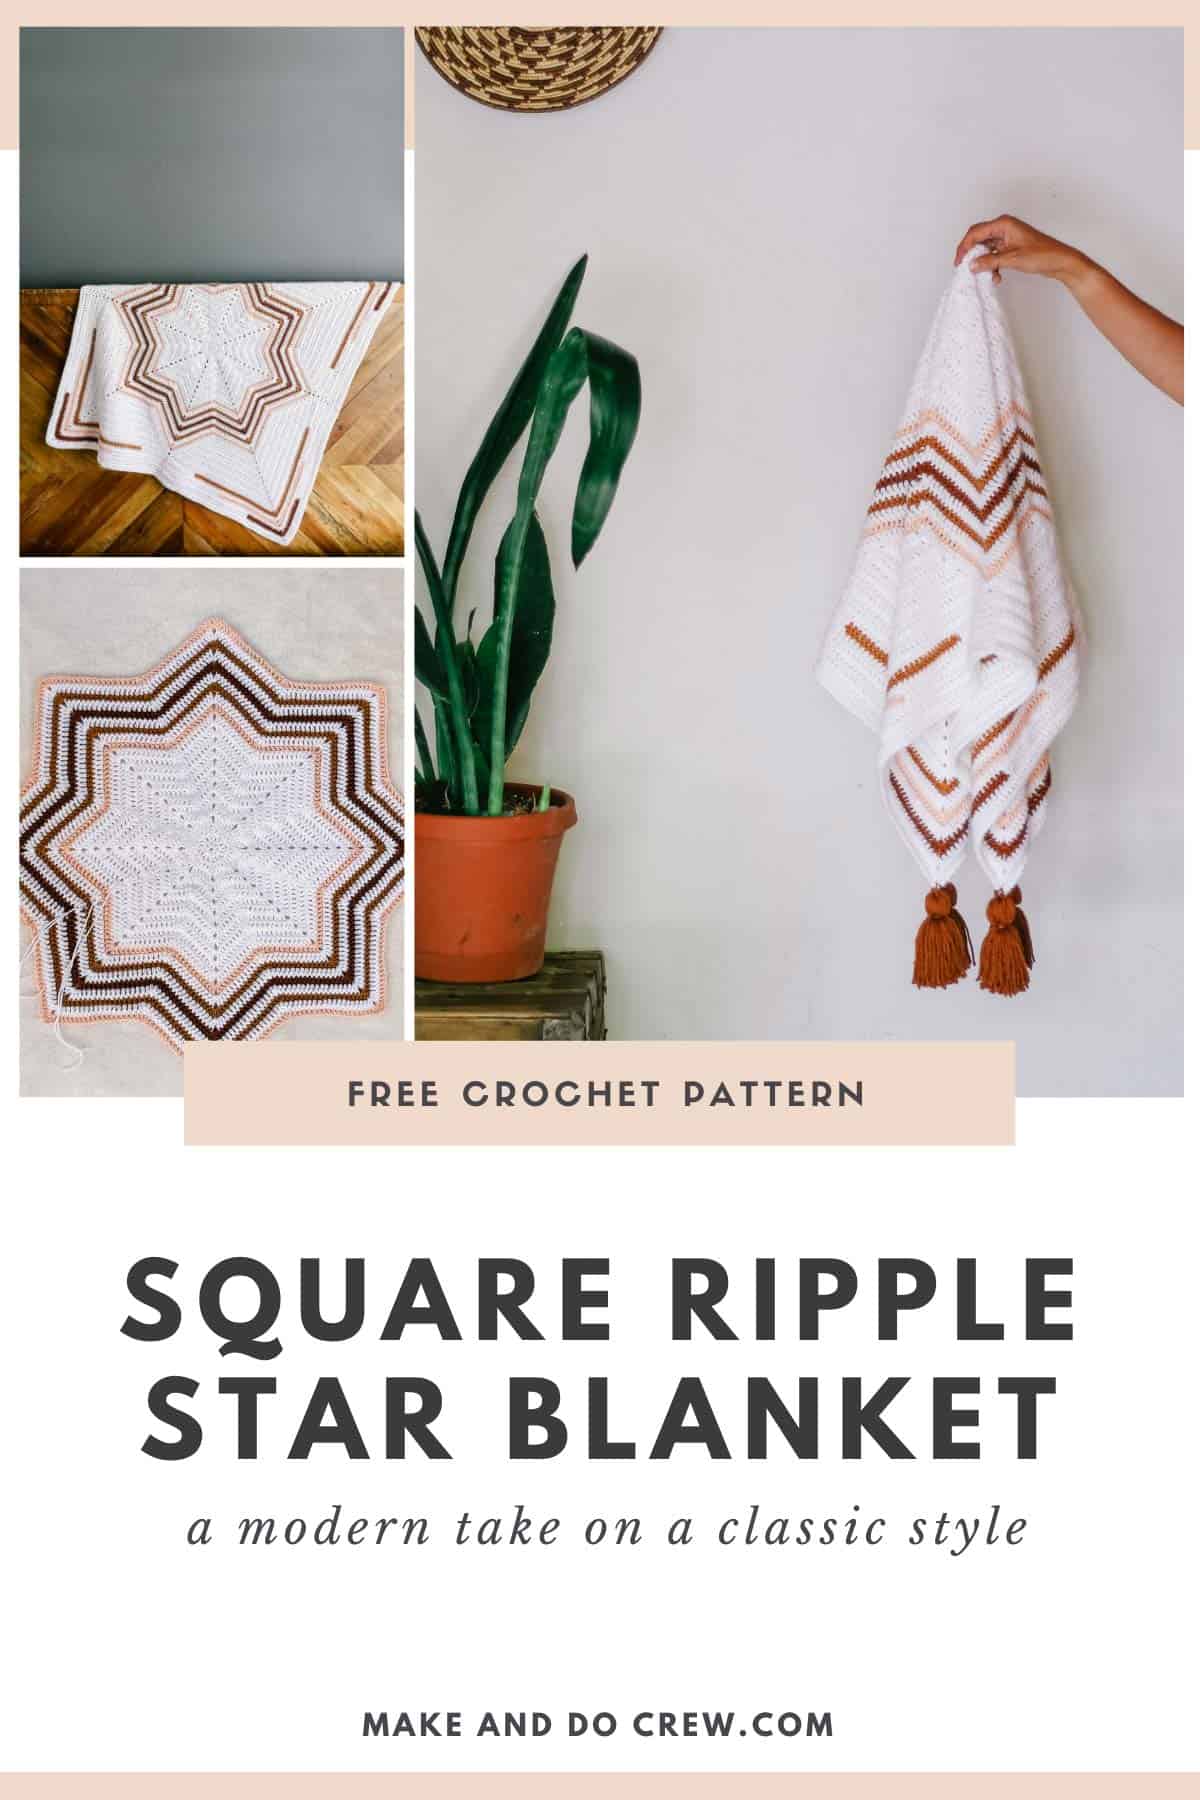 This image shows three photos of an 8 star crochet blanket. One photo is of the blanket laying over a headboard. One photo is the blanket laying flat on the ground. One photo is of the blanket being held up by a hand against a white wall. The text says, "Square Ripple Star Blanket."